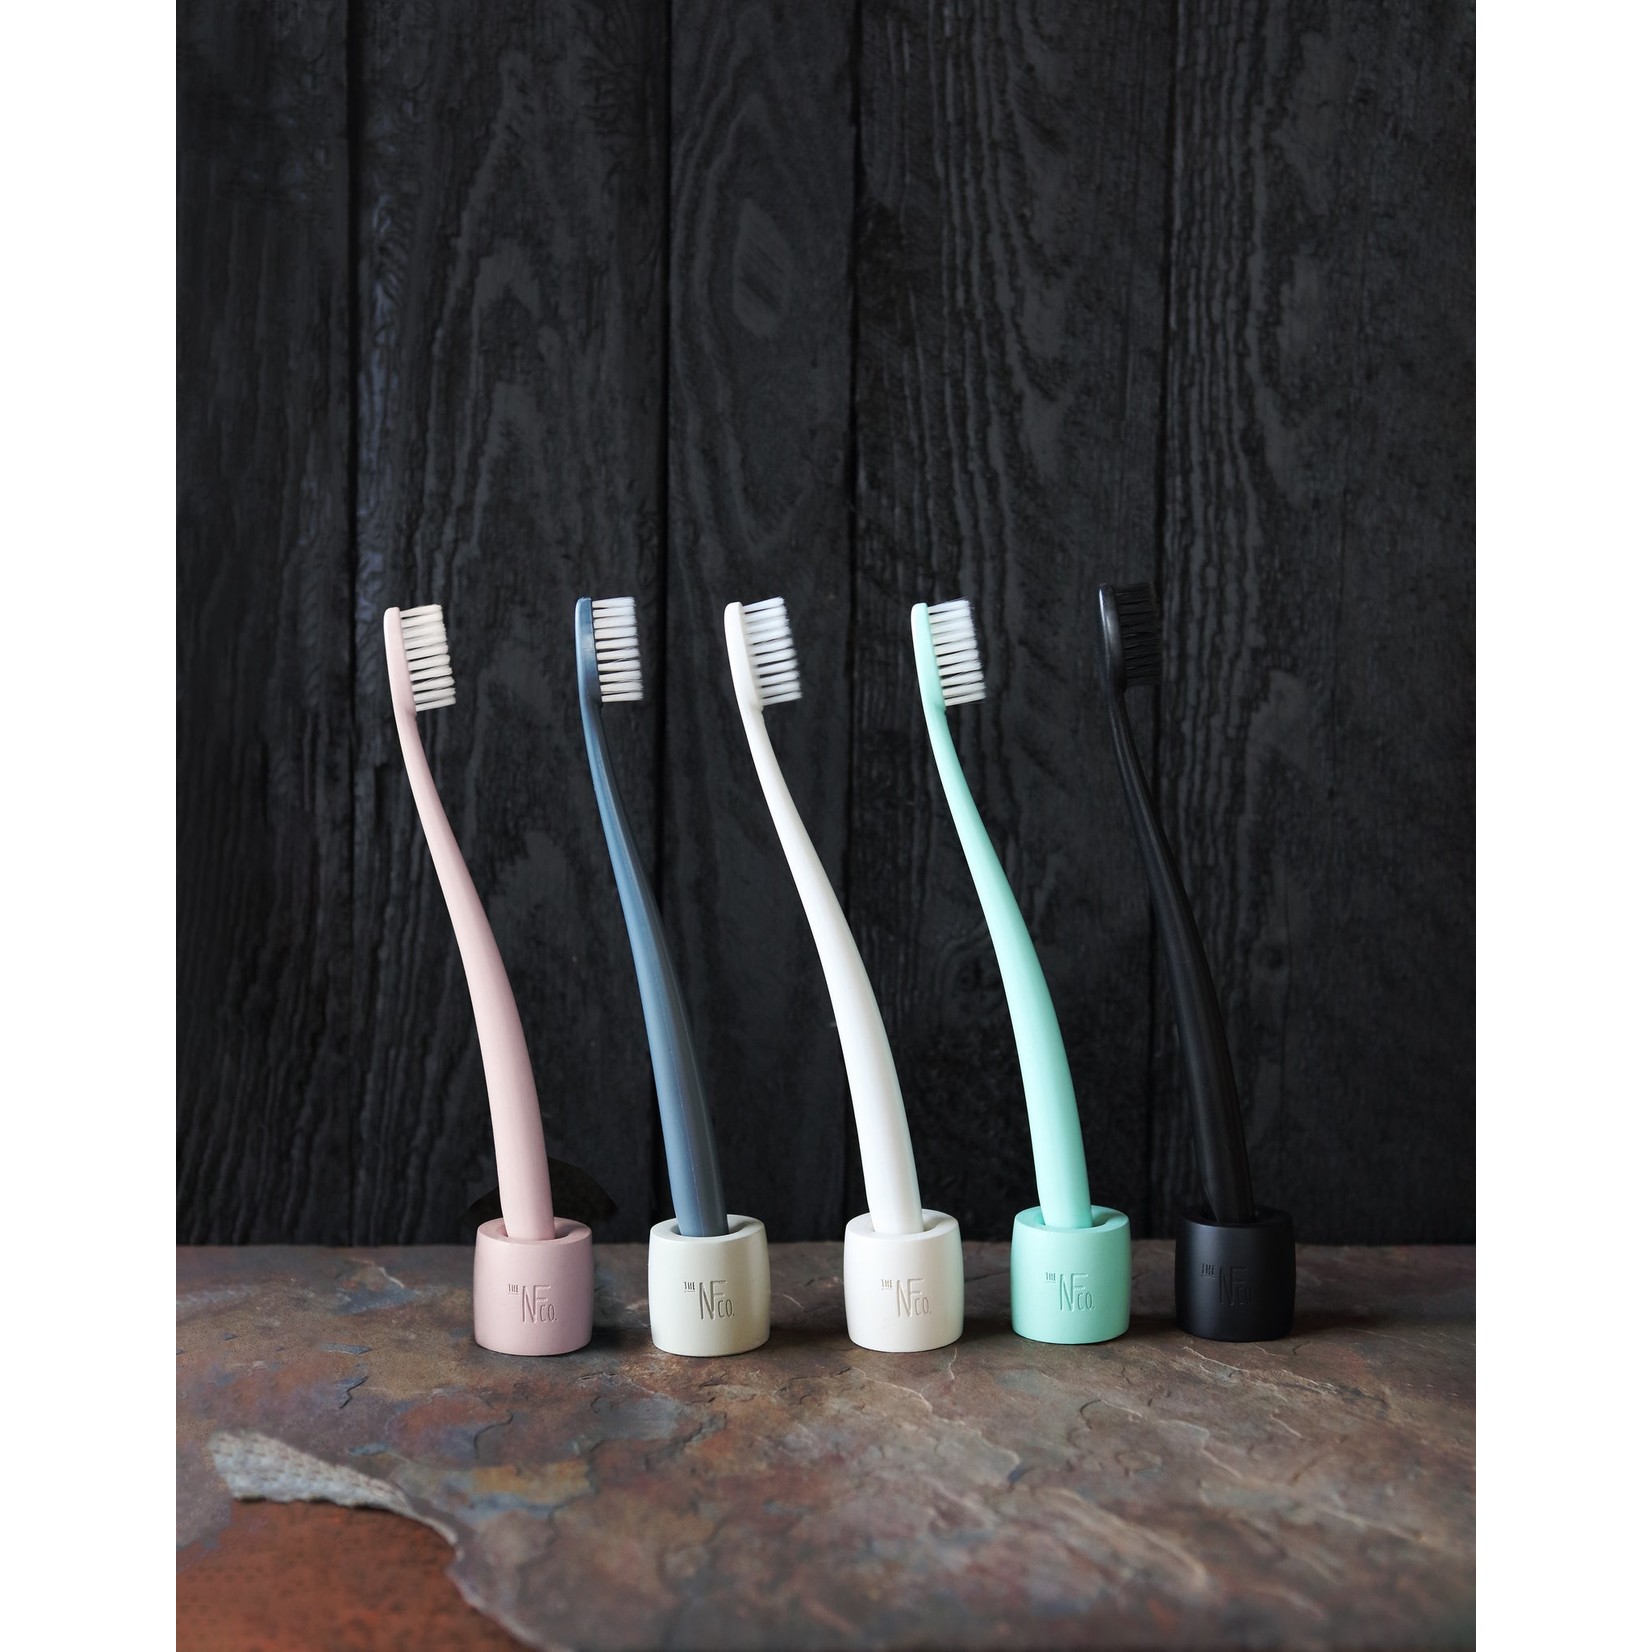 The NF Co. The Natural Family Co. Cornstarch toothbrush & stand